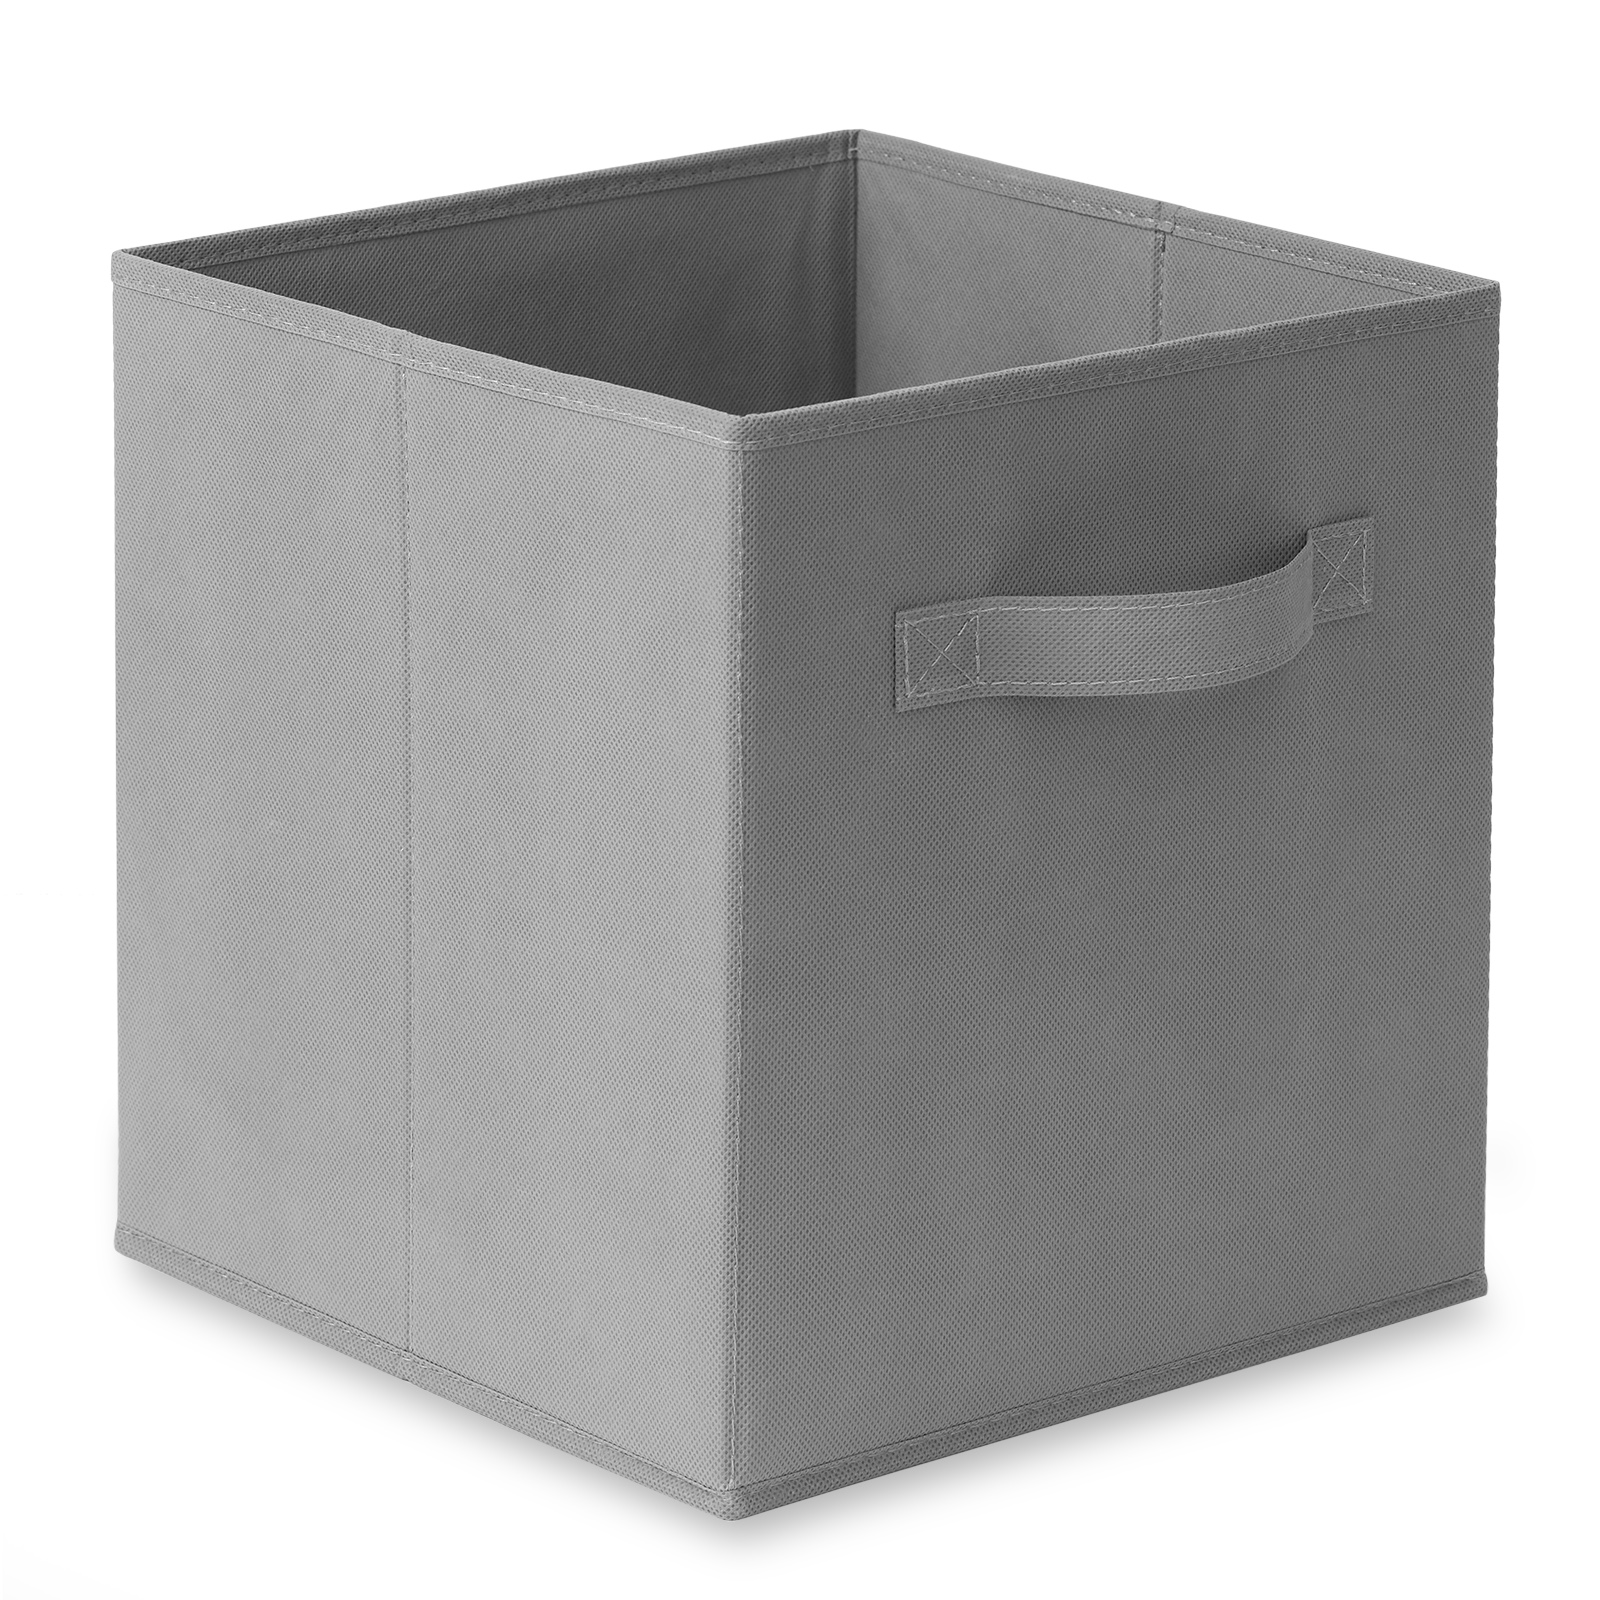 Casafield Set of 6 Collapsible Fabric Cube Storage Bins - 11" Foldable Cloth Baskets for Shelves, Cubby Organizers & More - image 5 of 7